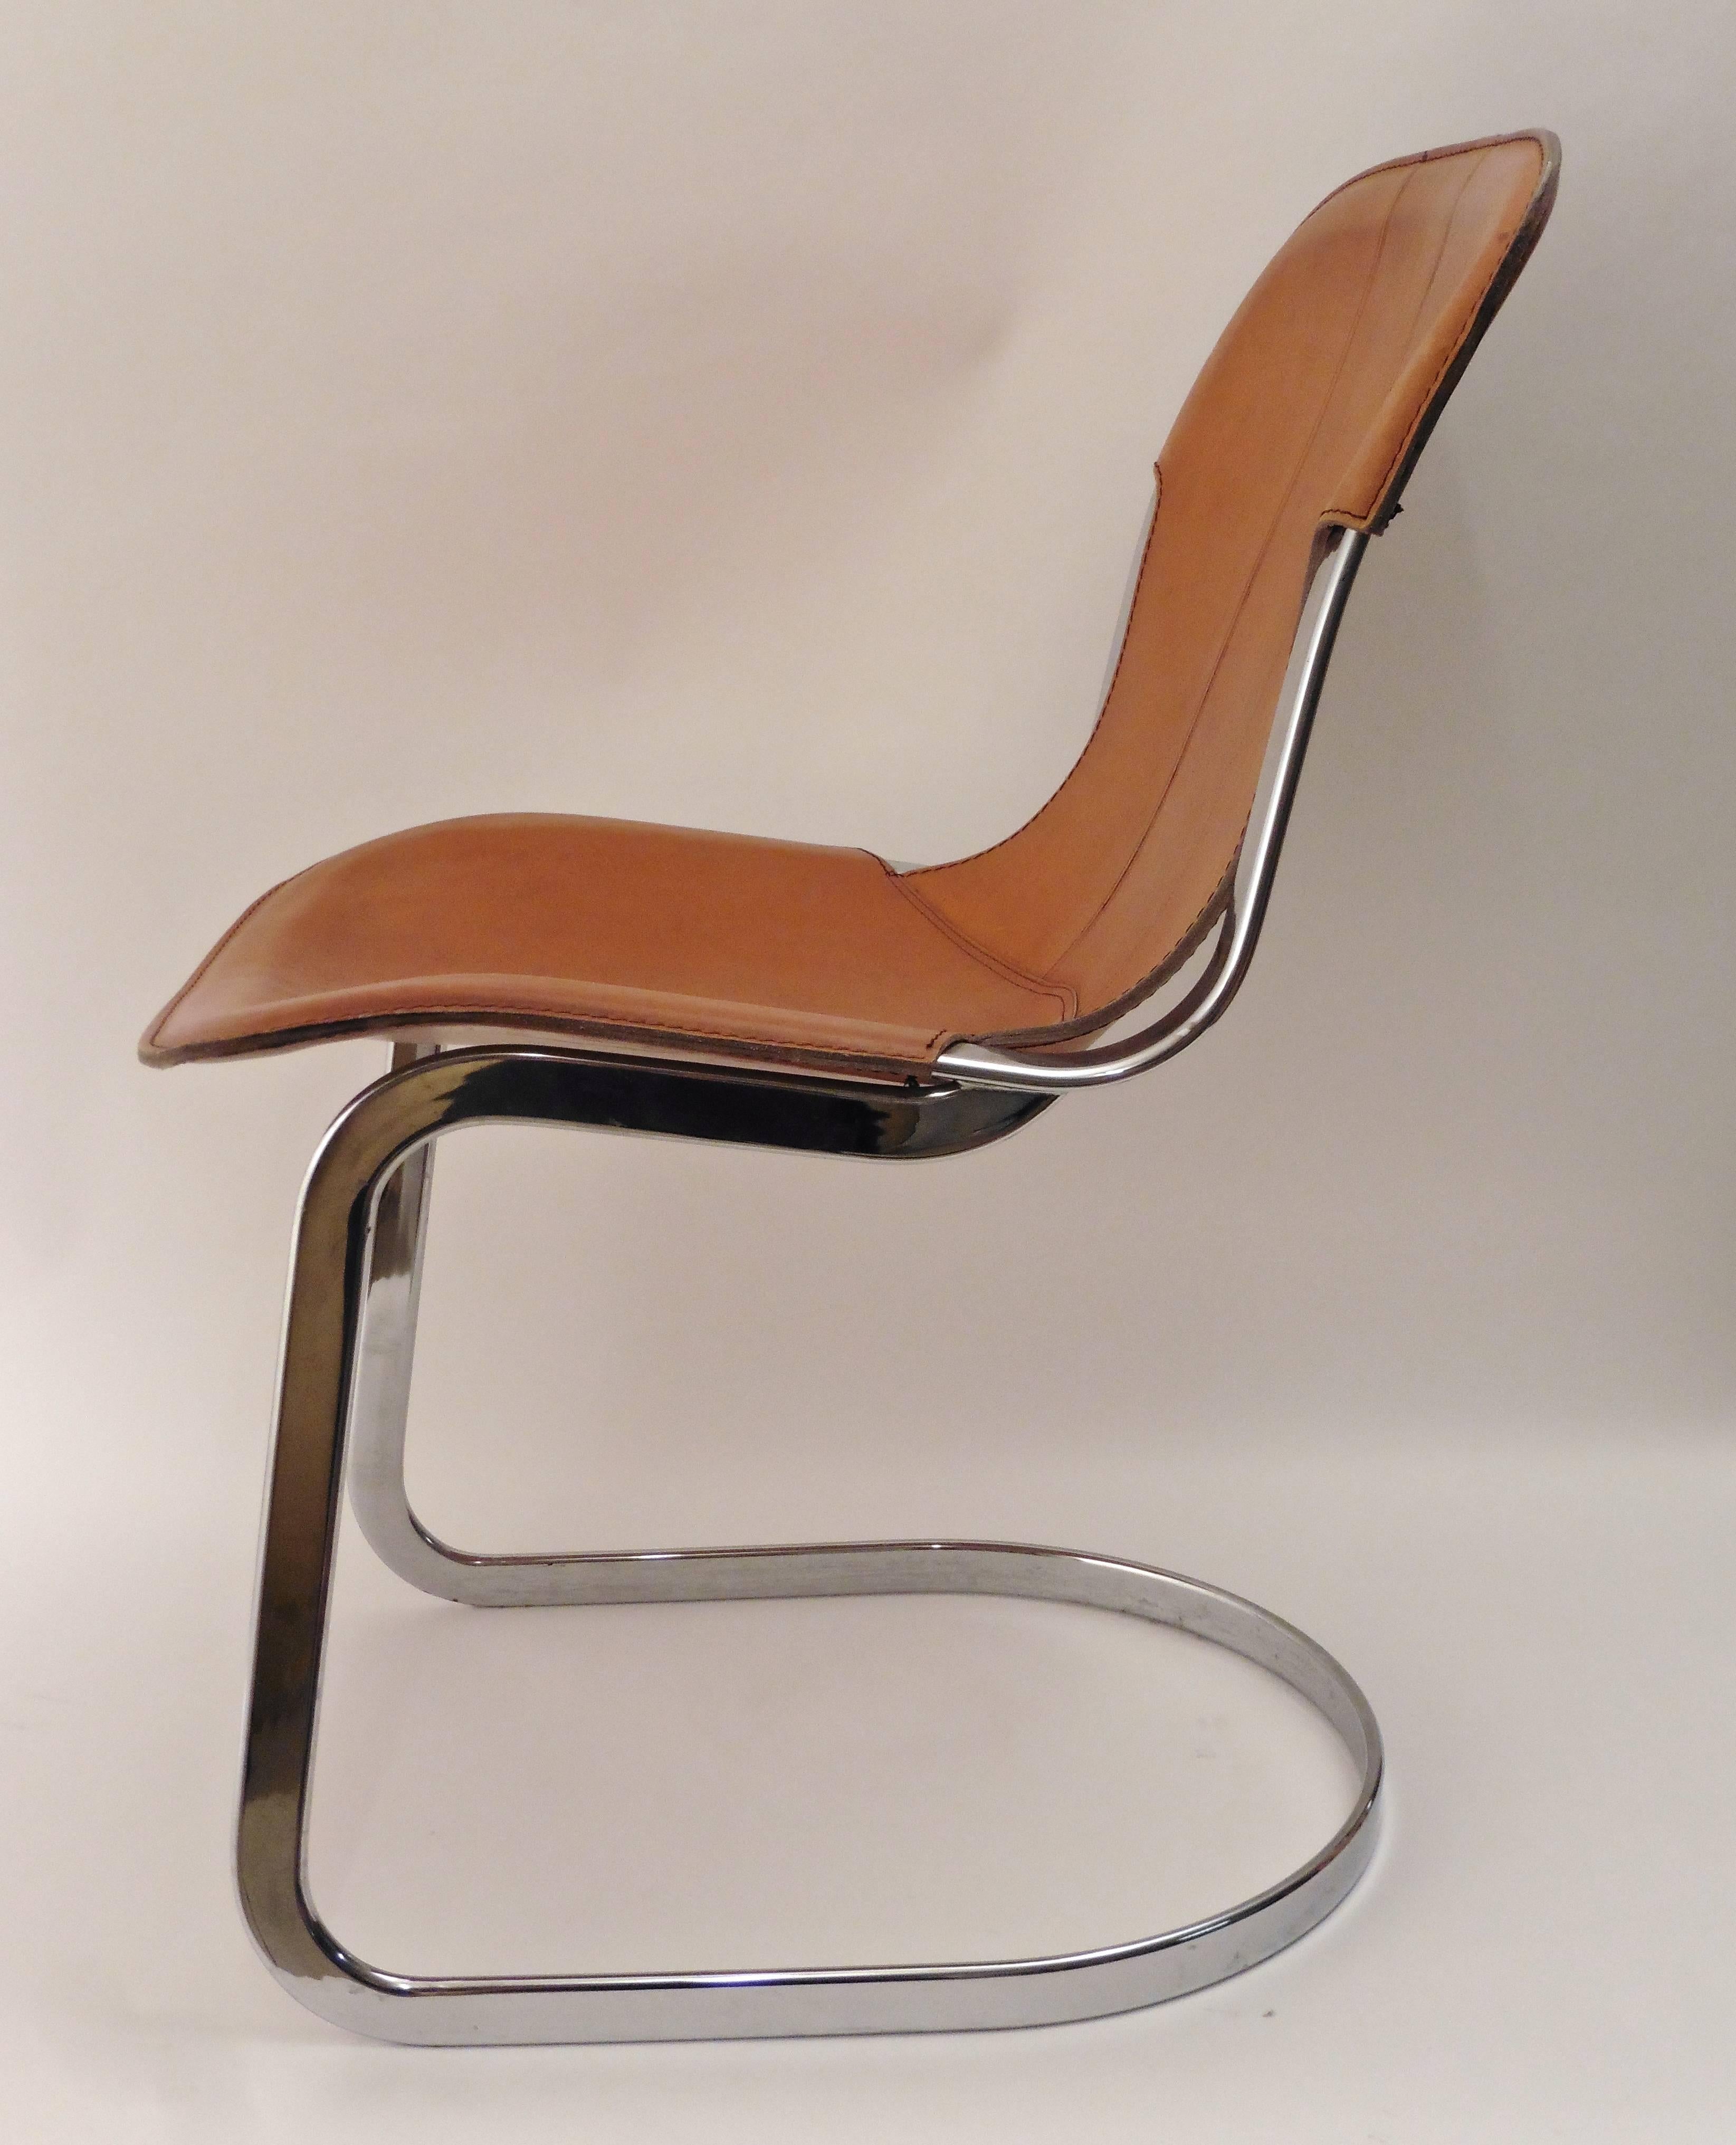 Set of six cantilever dining chairs by Cidue, circa 1970. With stitched tan leather seats on a tubular chrome frame. The leather showing a small amount of wear and tear commensurate with age.